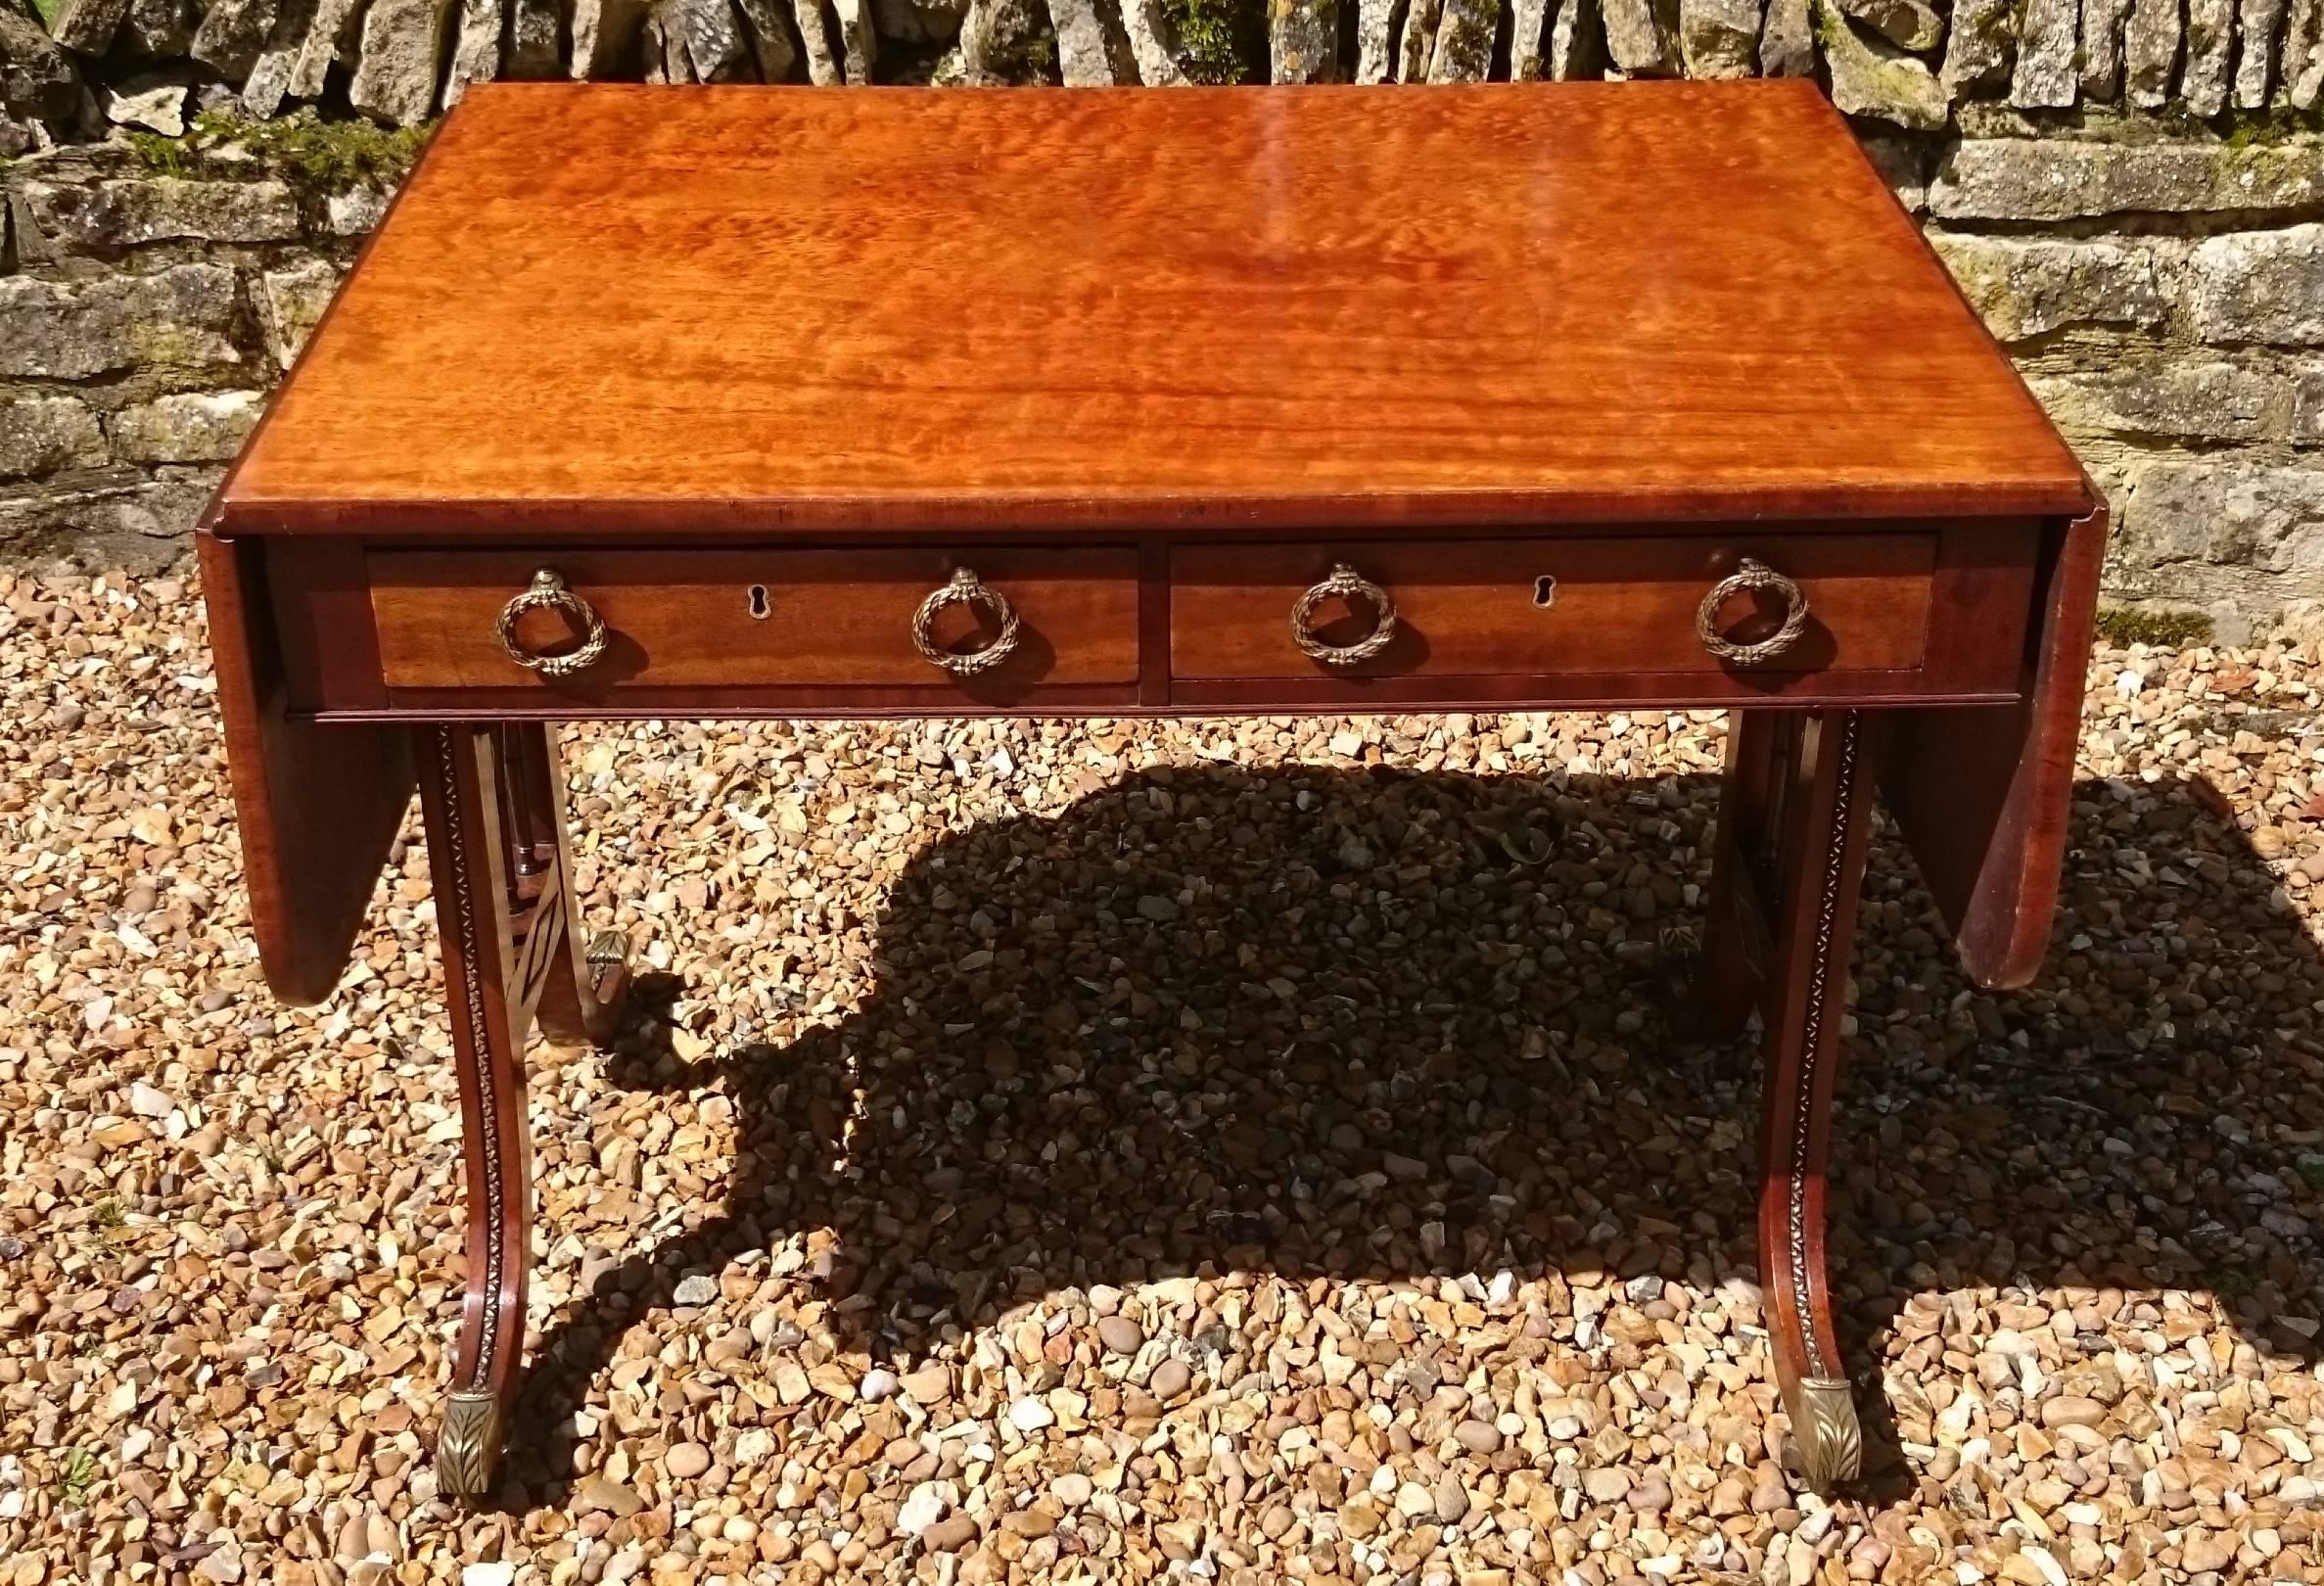 This is a very fine quality antique sofa table which must have cost a fortune as a new order. It would be hard to find anything lacking in any area at all, this table has it all. From the top down, it has the best quality mahogany top that we have